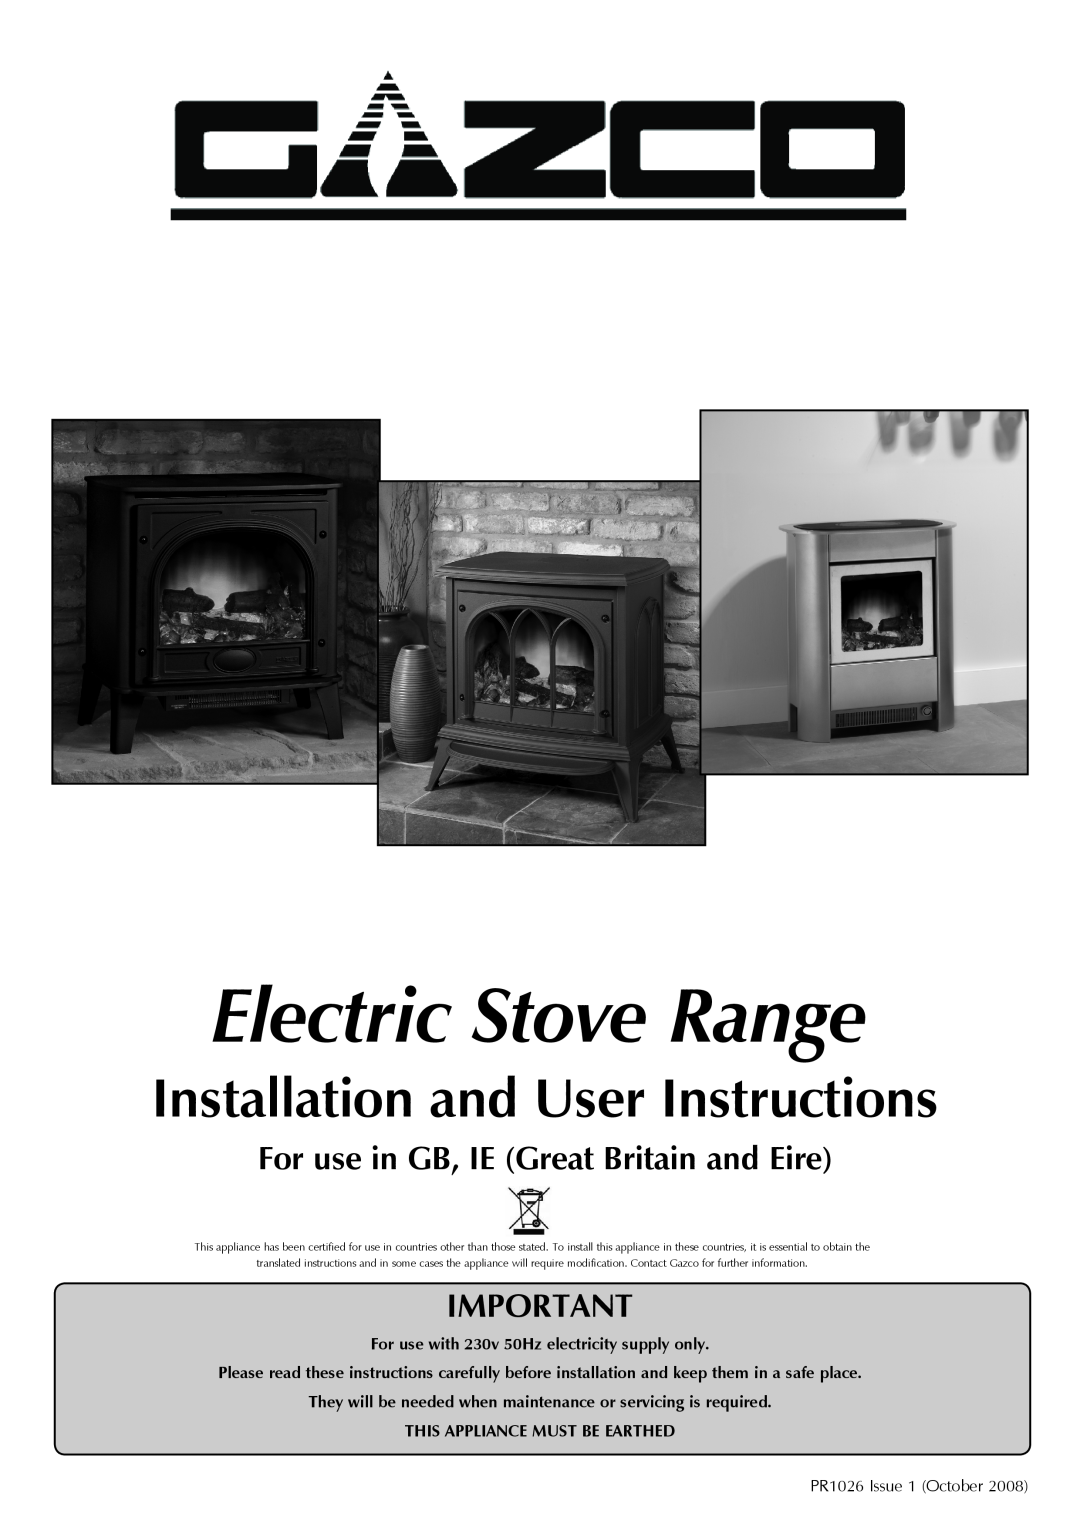 Stovax Electric Stove Range manual Installation and User Instructions, For use in GB, IE Great Britain and Eire 